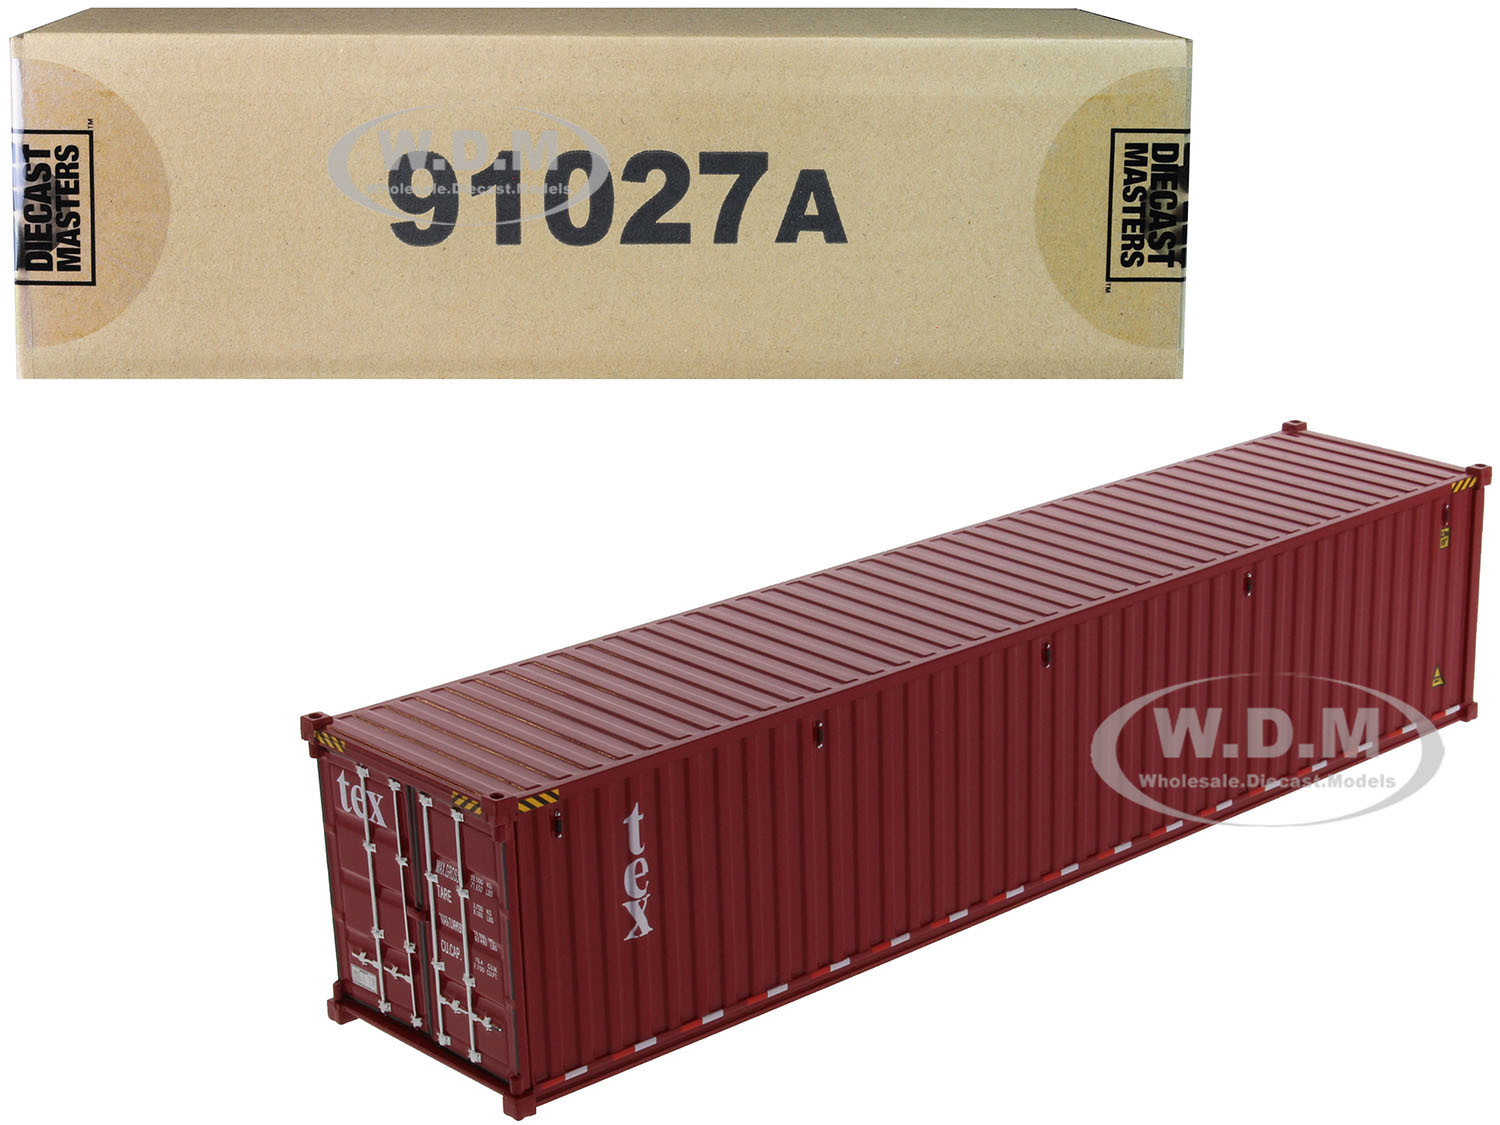 40 Dry Goods Sea Container "TEX" Burgundy "Transport Series" 1/50 Model by Diecast Masters